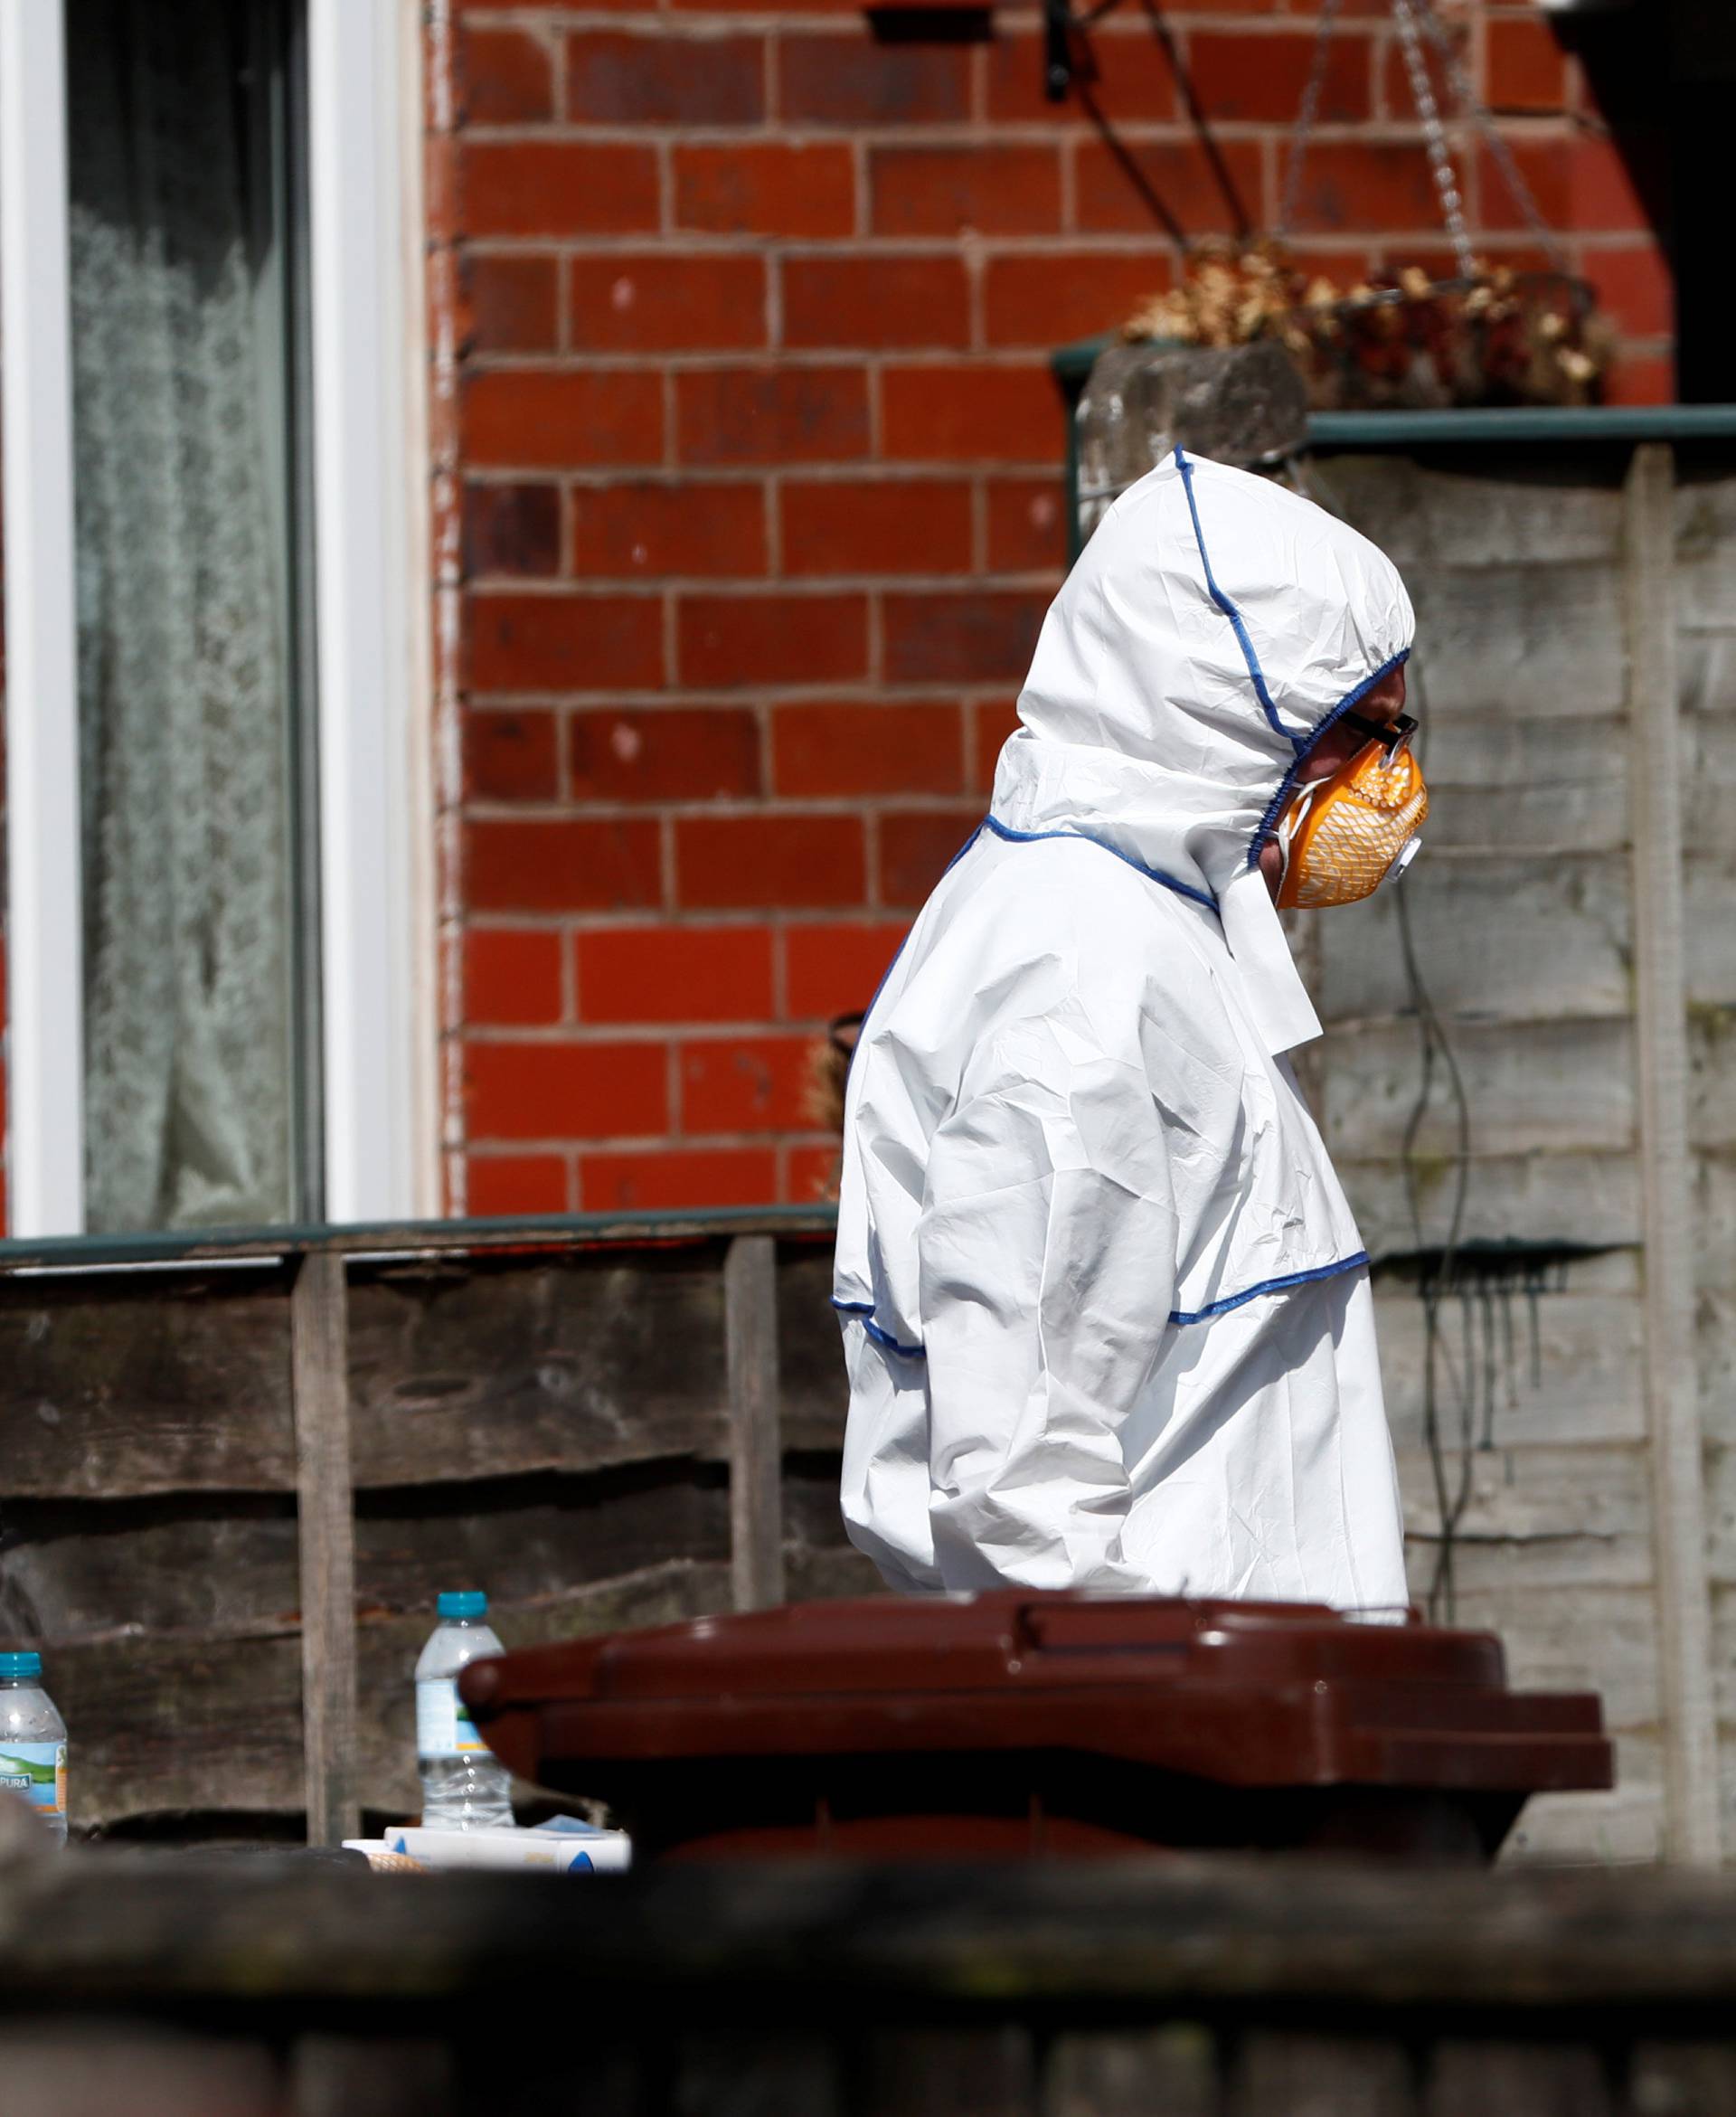 Police investigators work at residential property in south Manchester